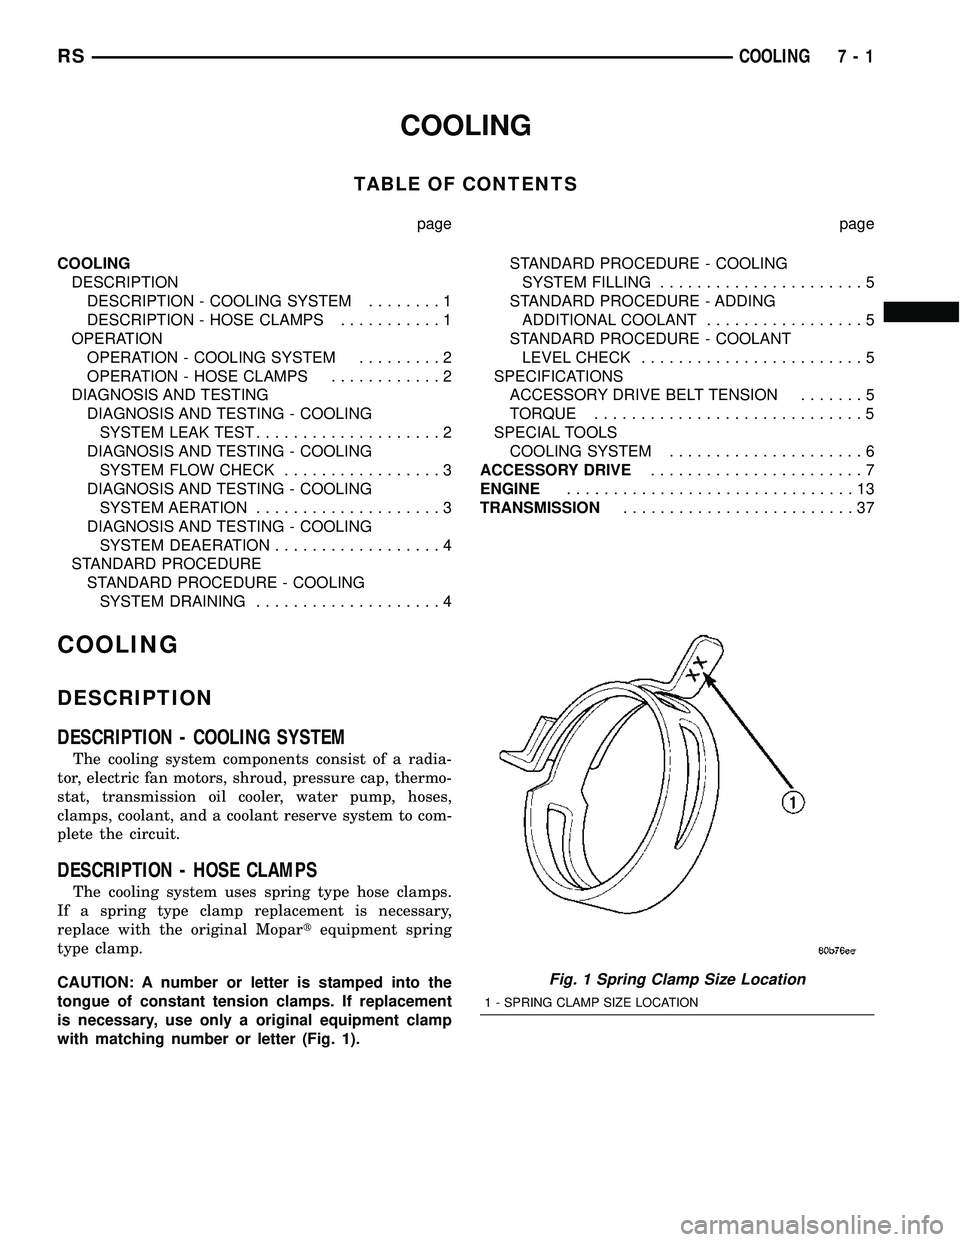 DODGE TOWN AND COUNTRY 2004  Service Manual COOLING
TABLE OF CONTENTS
page page
COOLING
DESCRIPTION
DESCRIPTION - COOLING SYSTEM........1
DESCRIPTION - HOSE CLAMPS...........1
OPERATION
OPERATION - COOLING SYSTEM.........2
OPERATION - HOSE CLAM